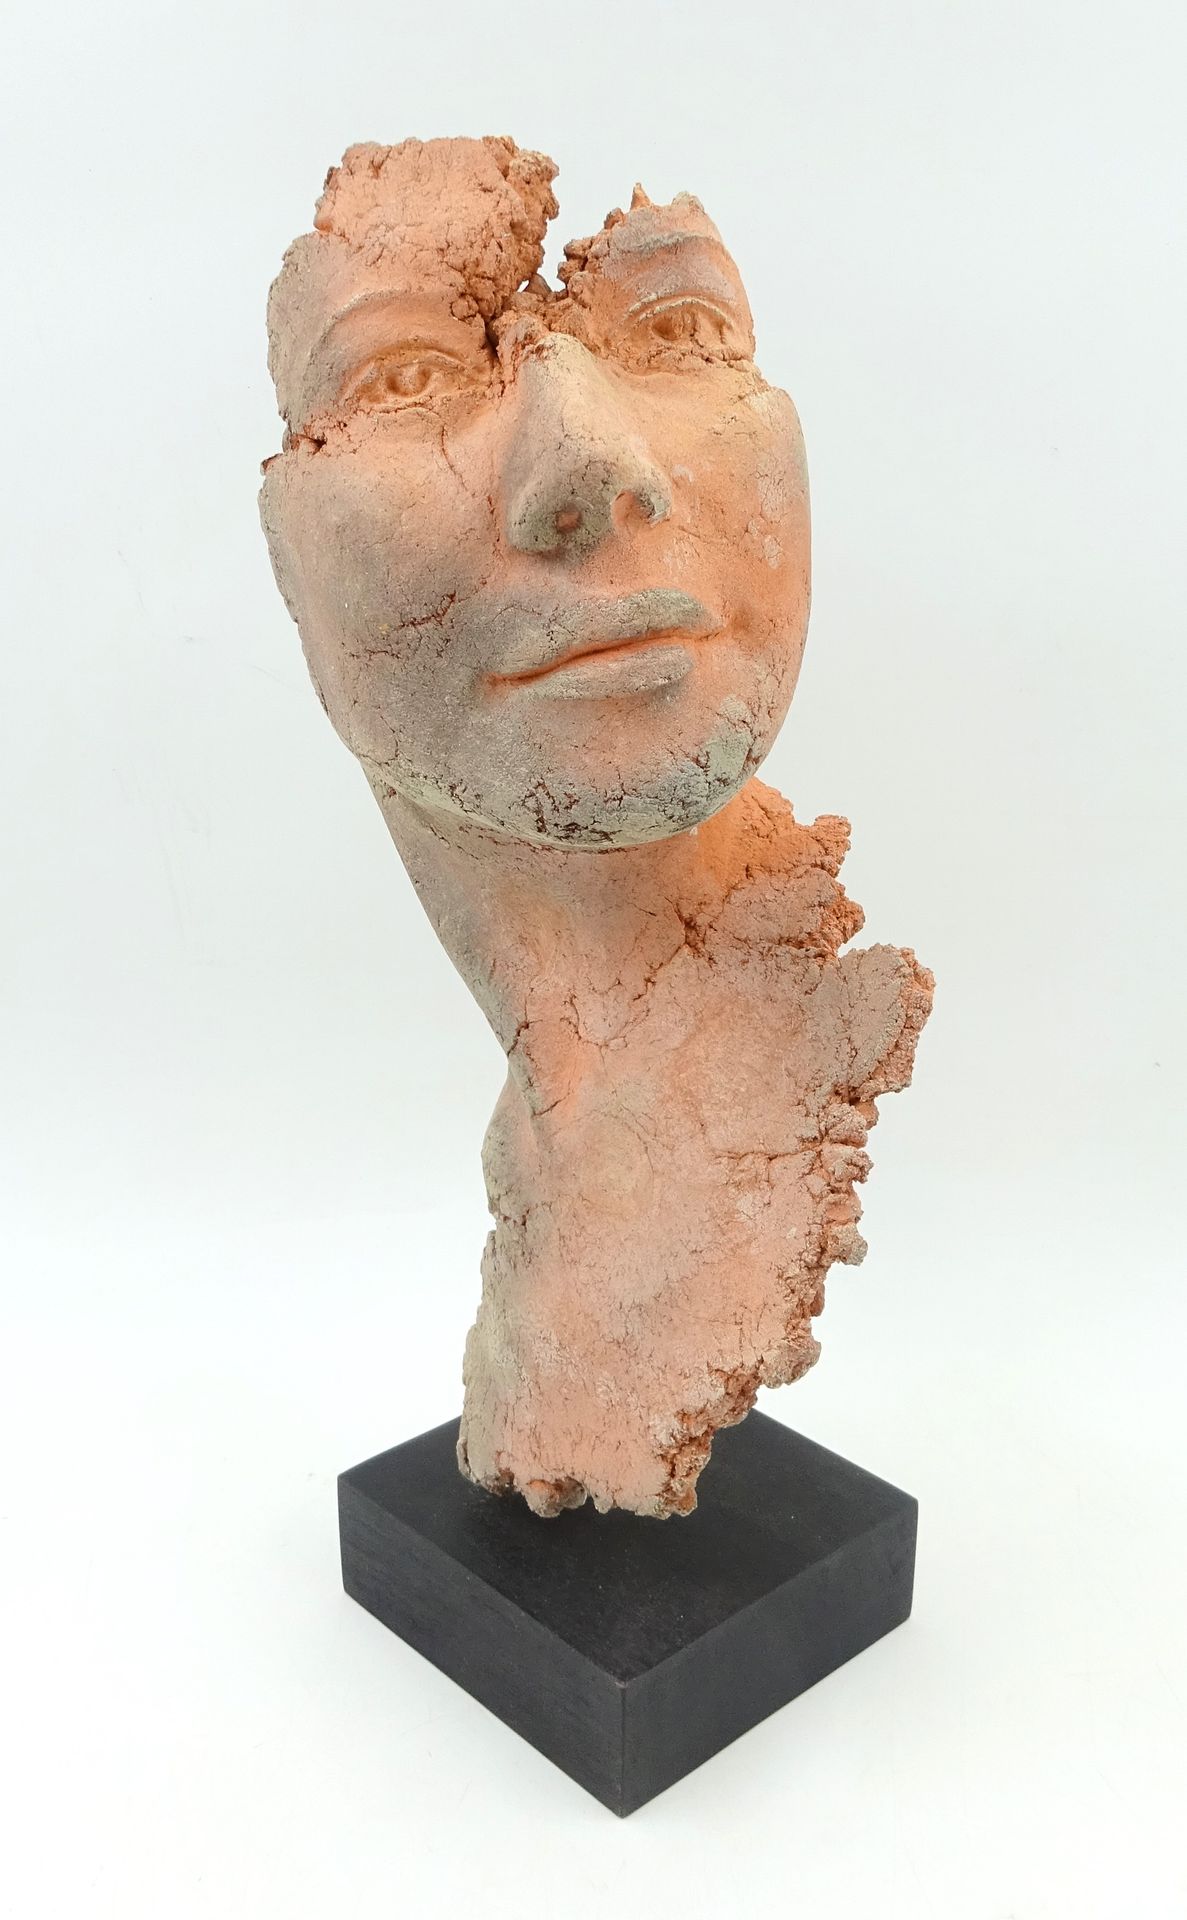 Null Philippe MOREL (b. 1948), attributed to. Bust and face facing right. Terrac&hellip;